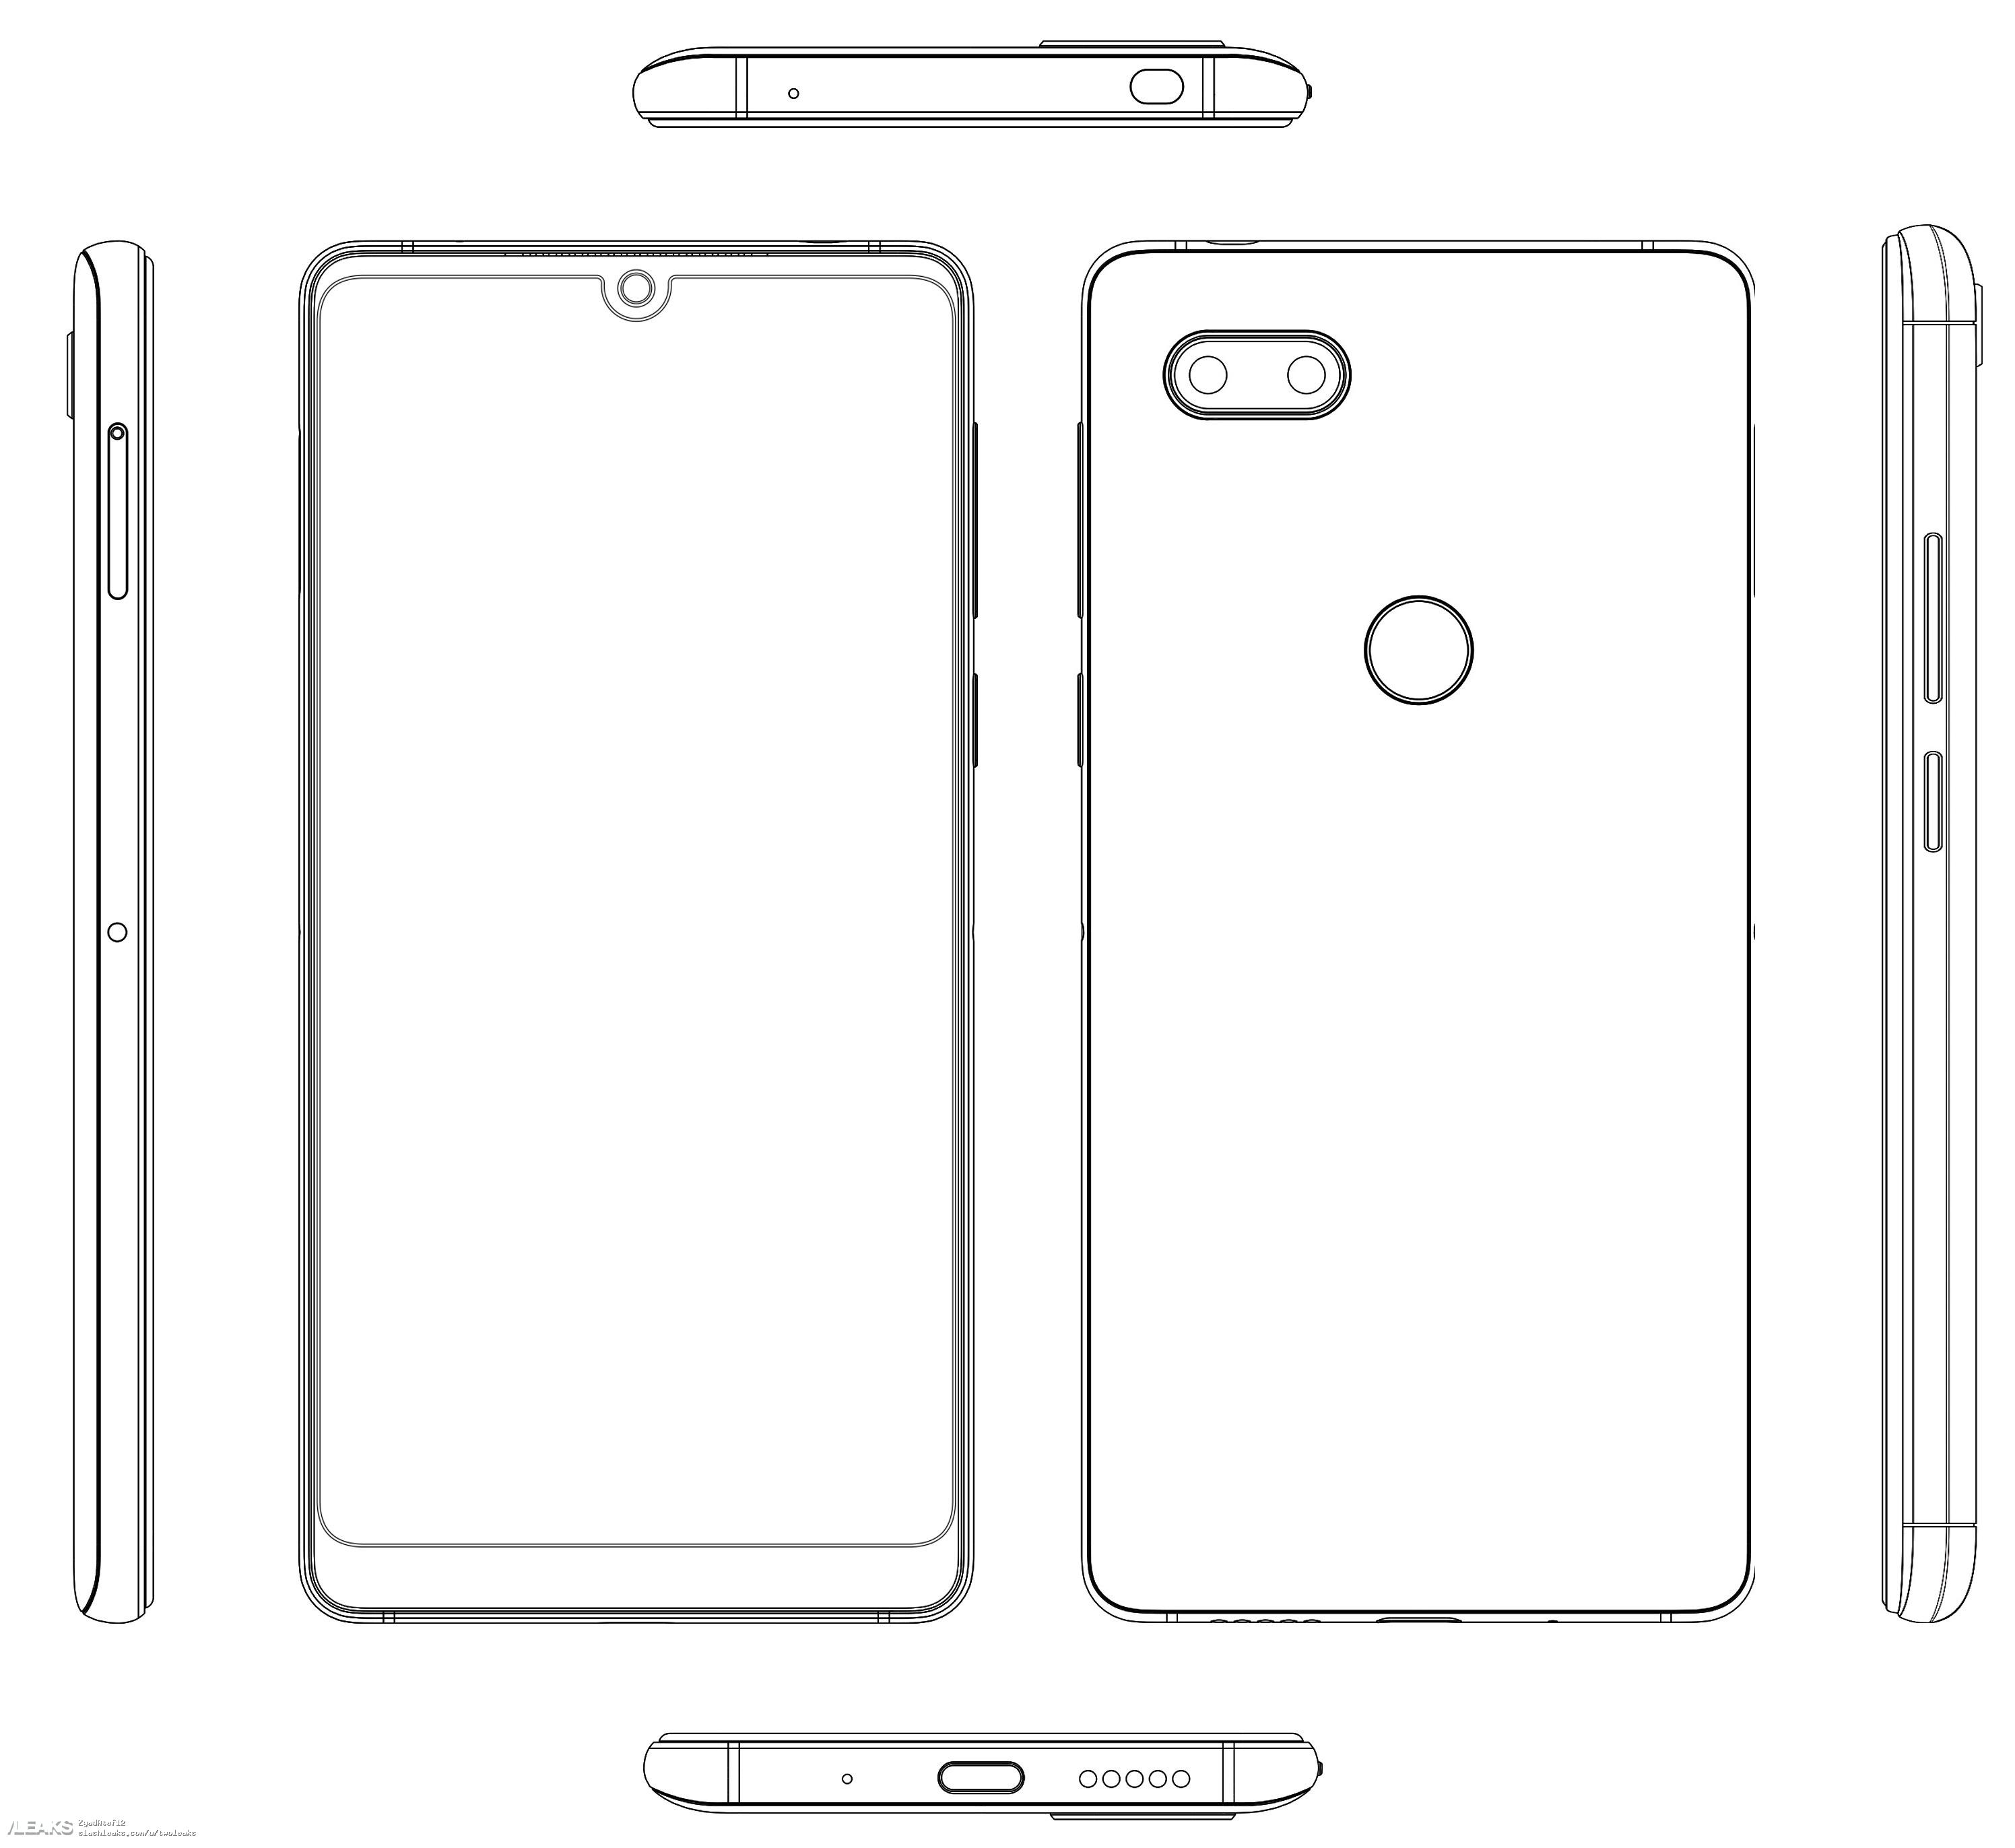 ZTE Nubia patents smartphone design with display-notch; could be Nubia Z19 2